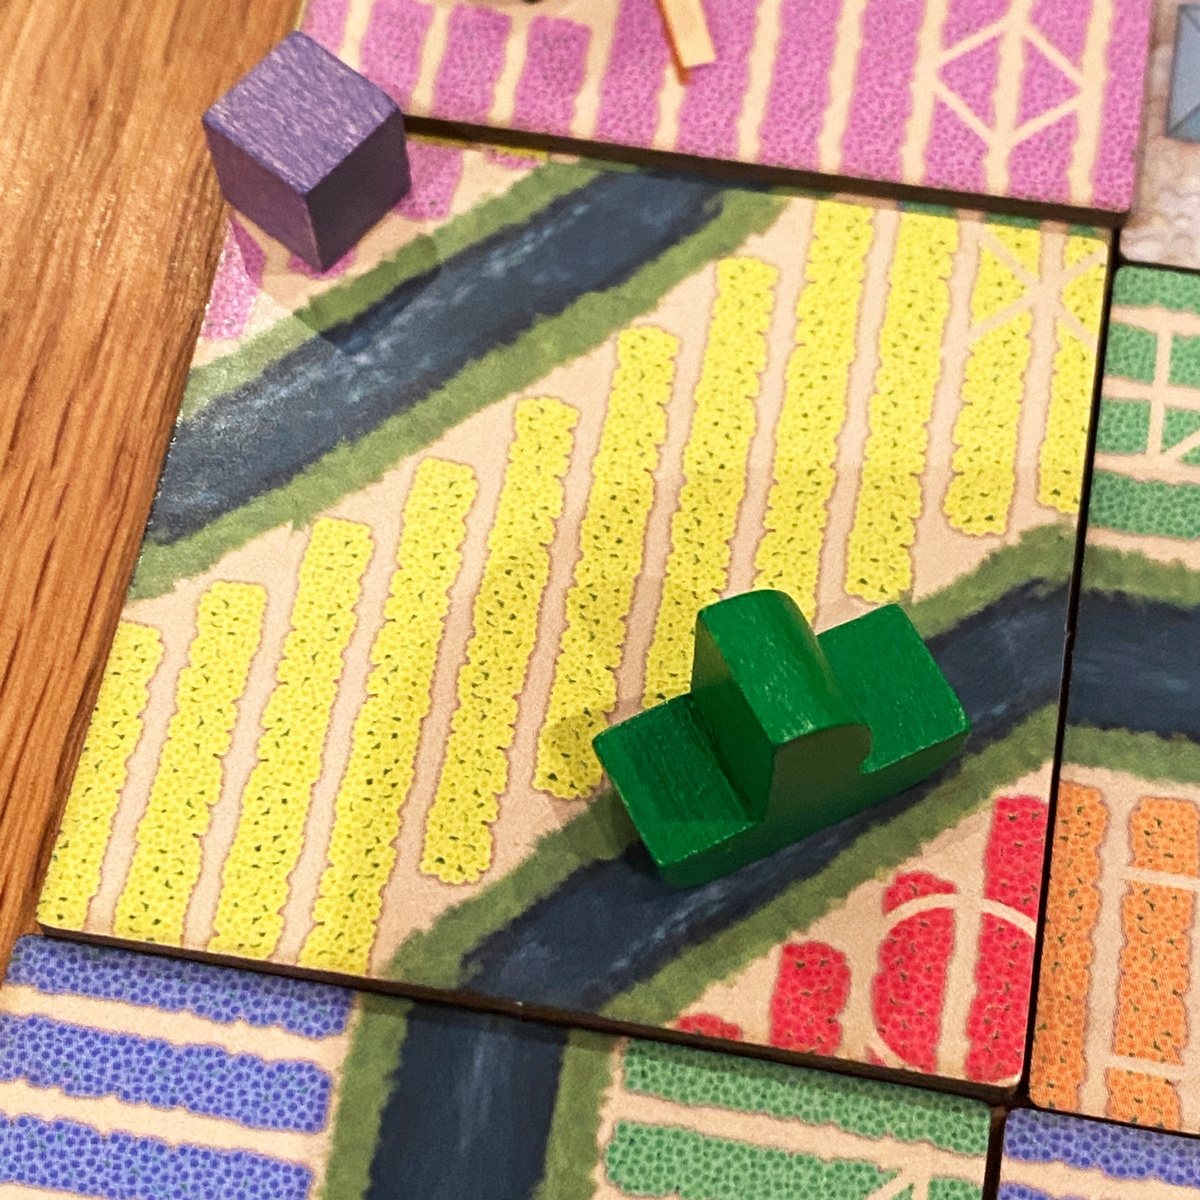 Blooming Industry tile Image © Board Game Review UK